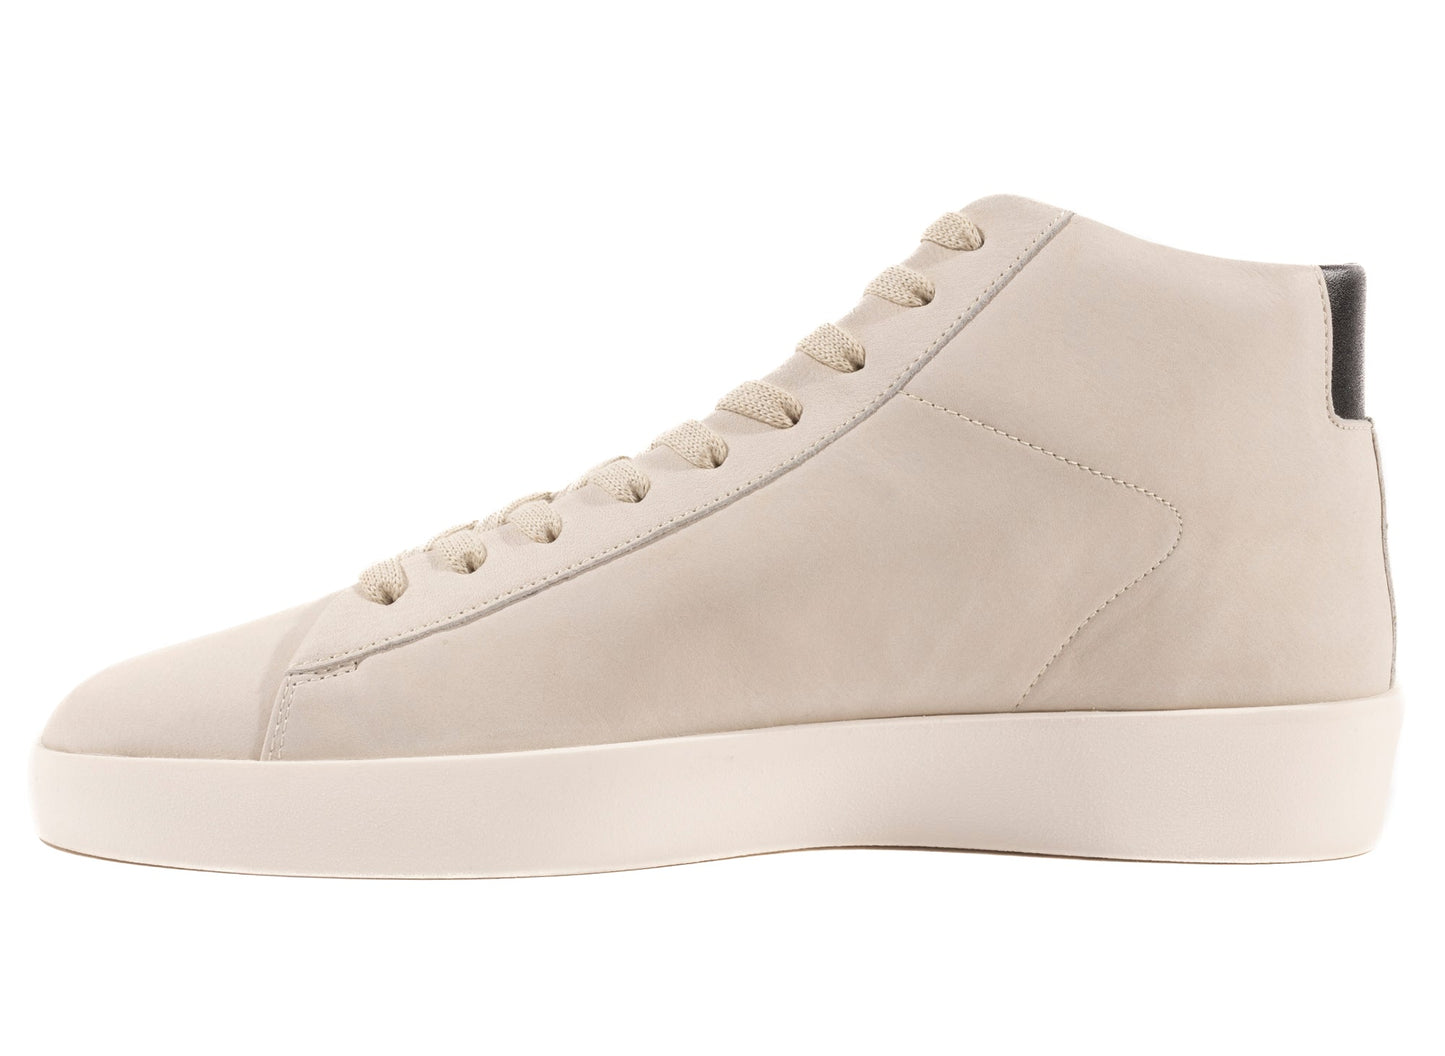 Fear of God Tennis Mid 'Cement'